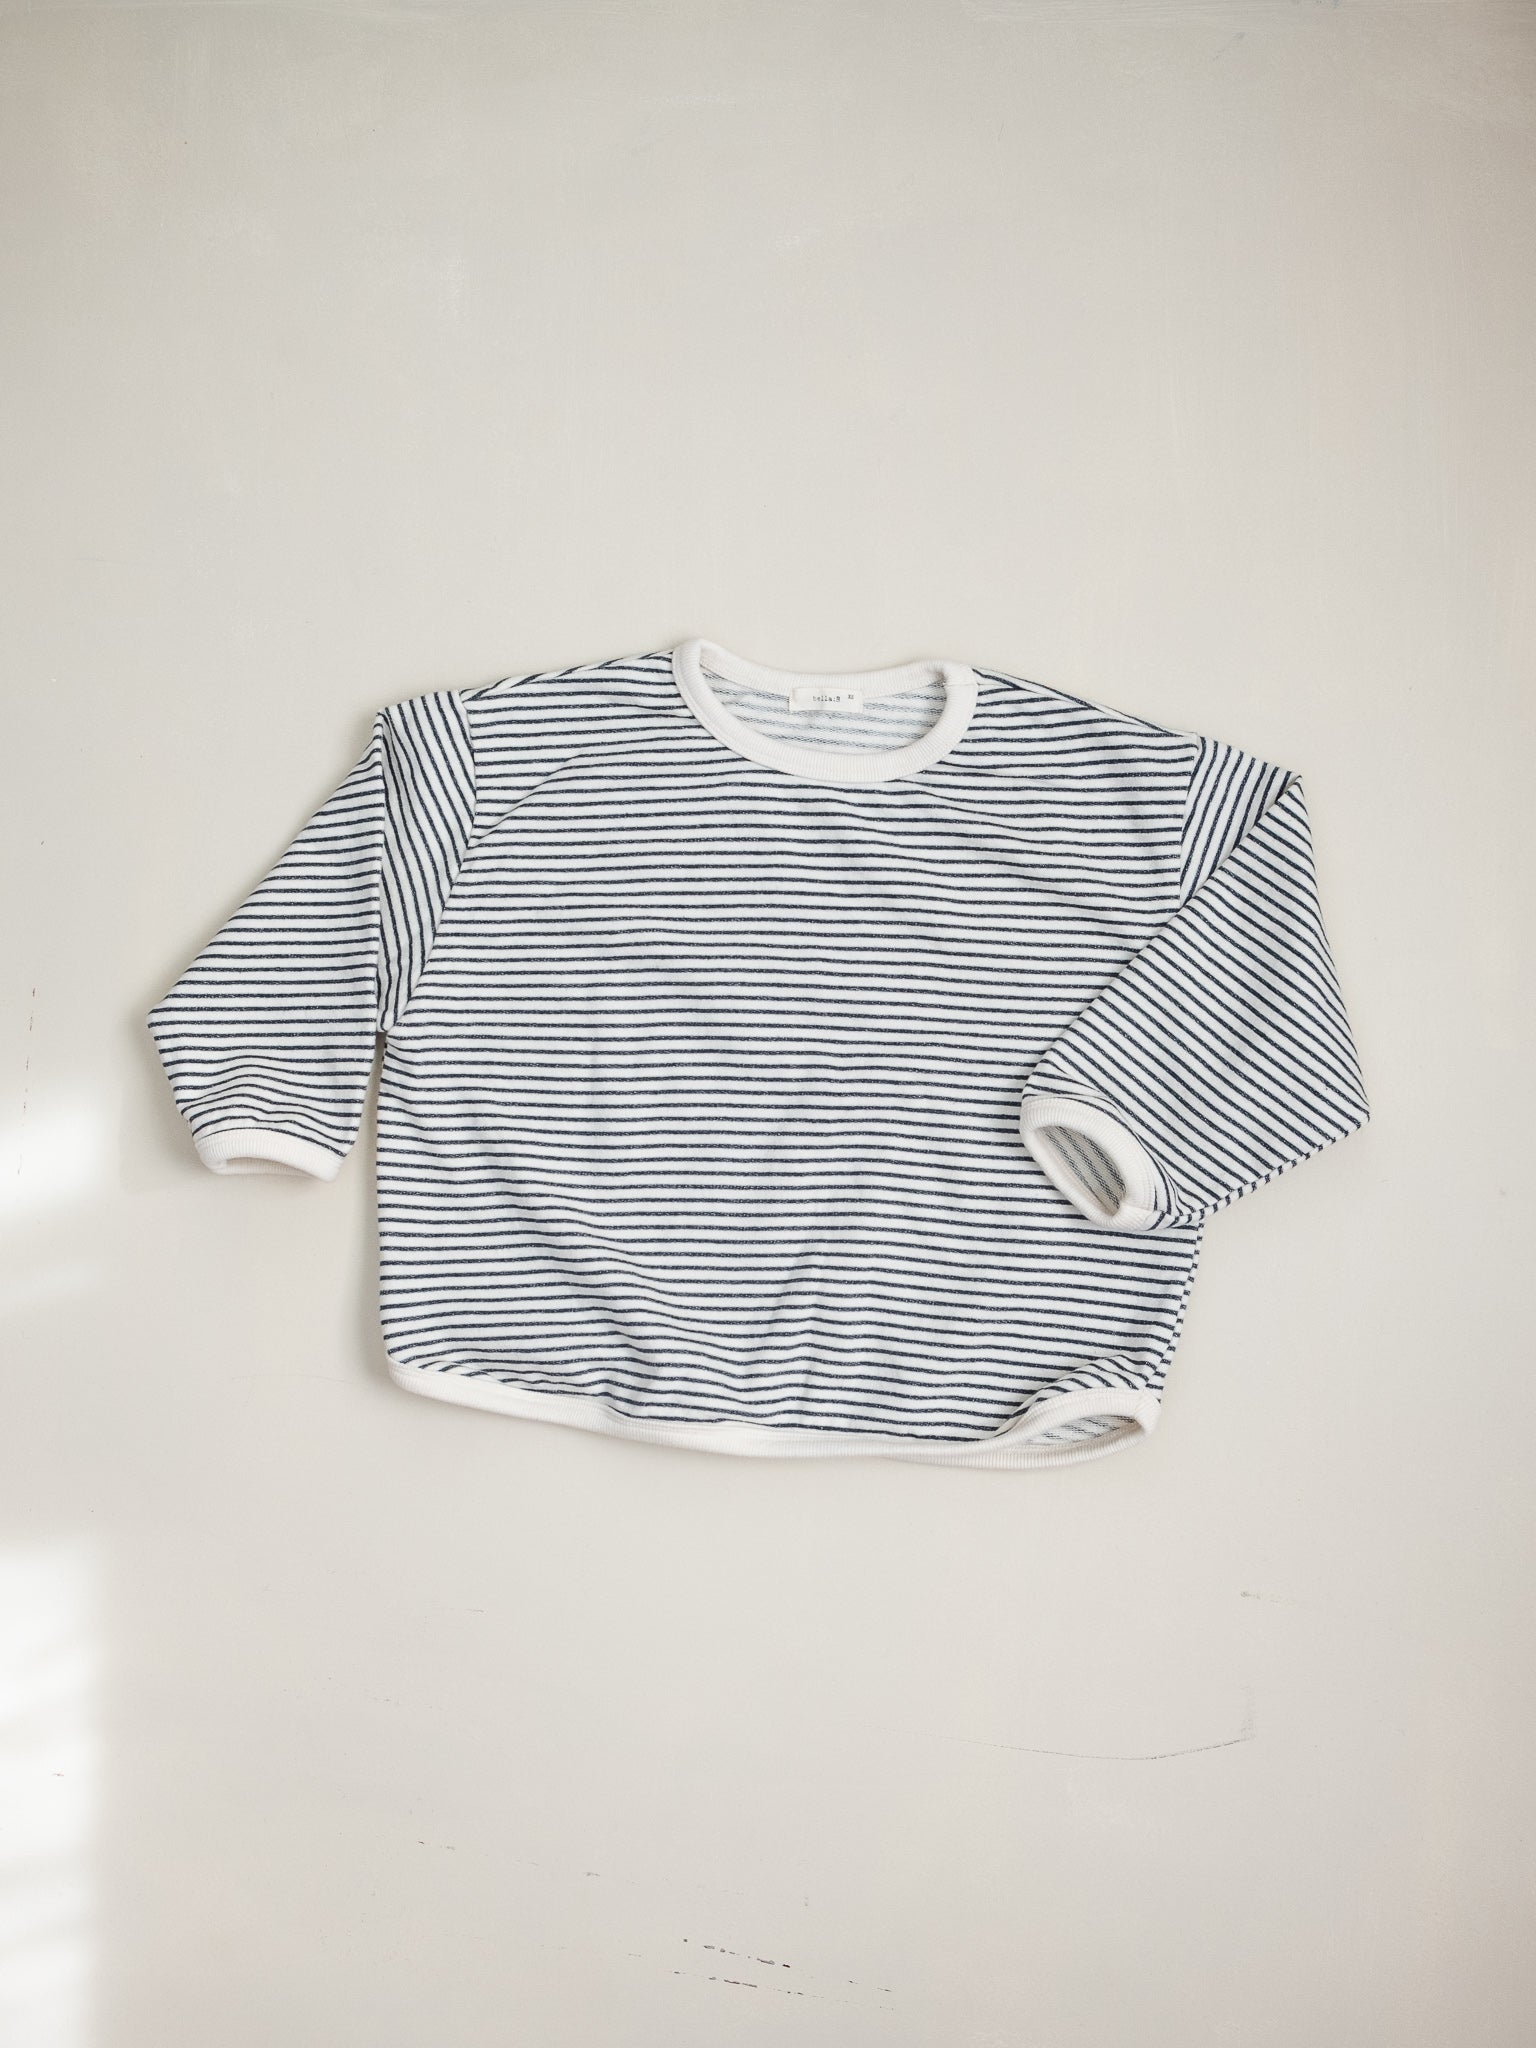 Everyday Jumper - Charcoal Stripe